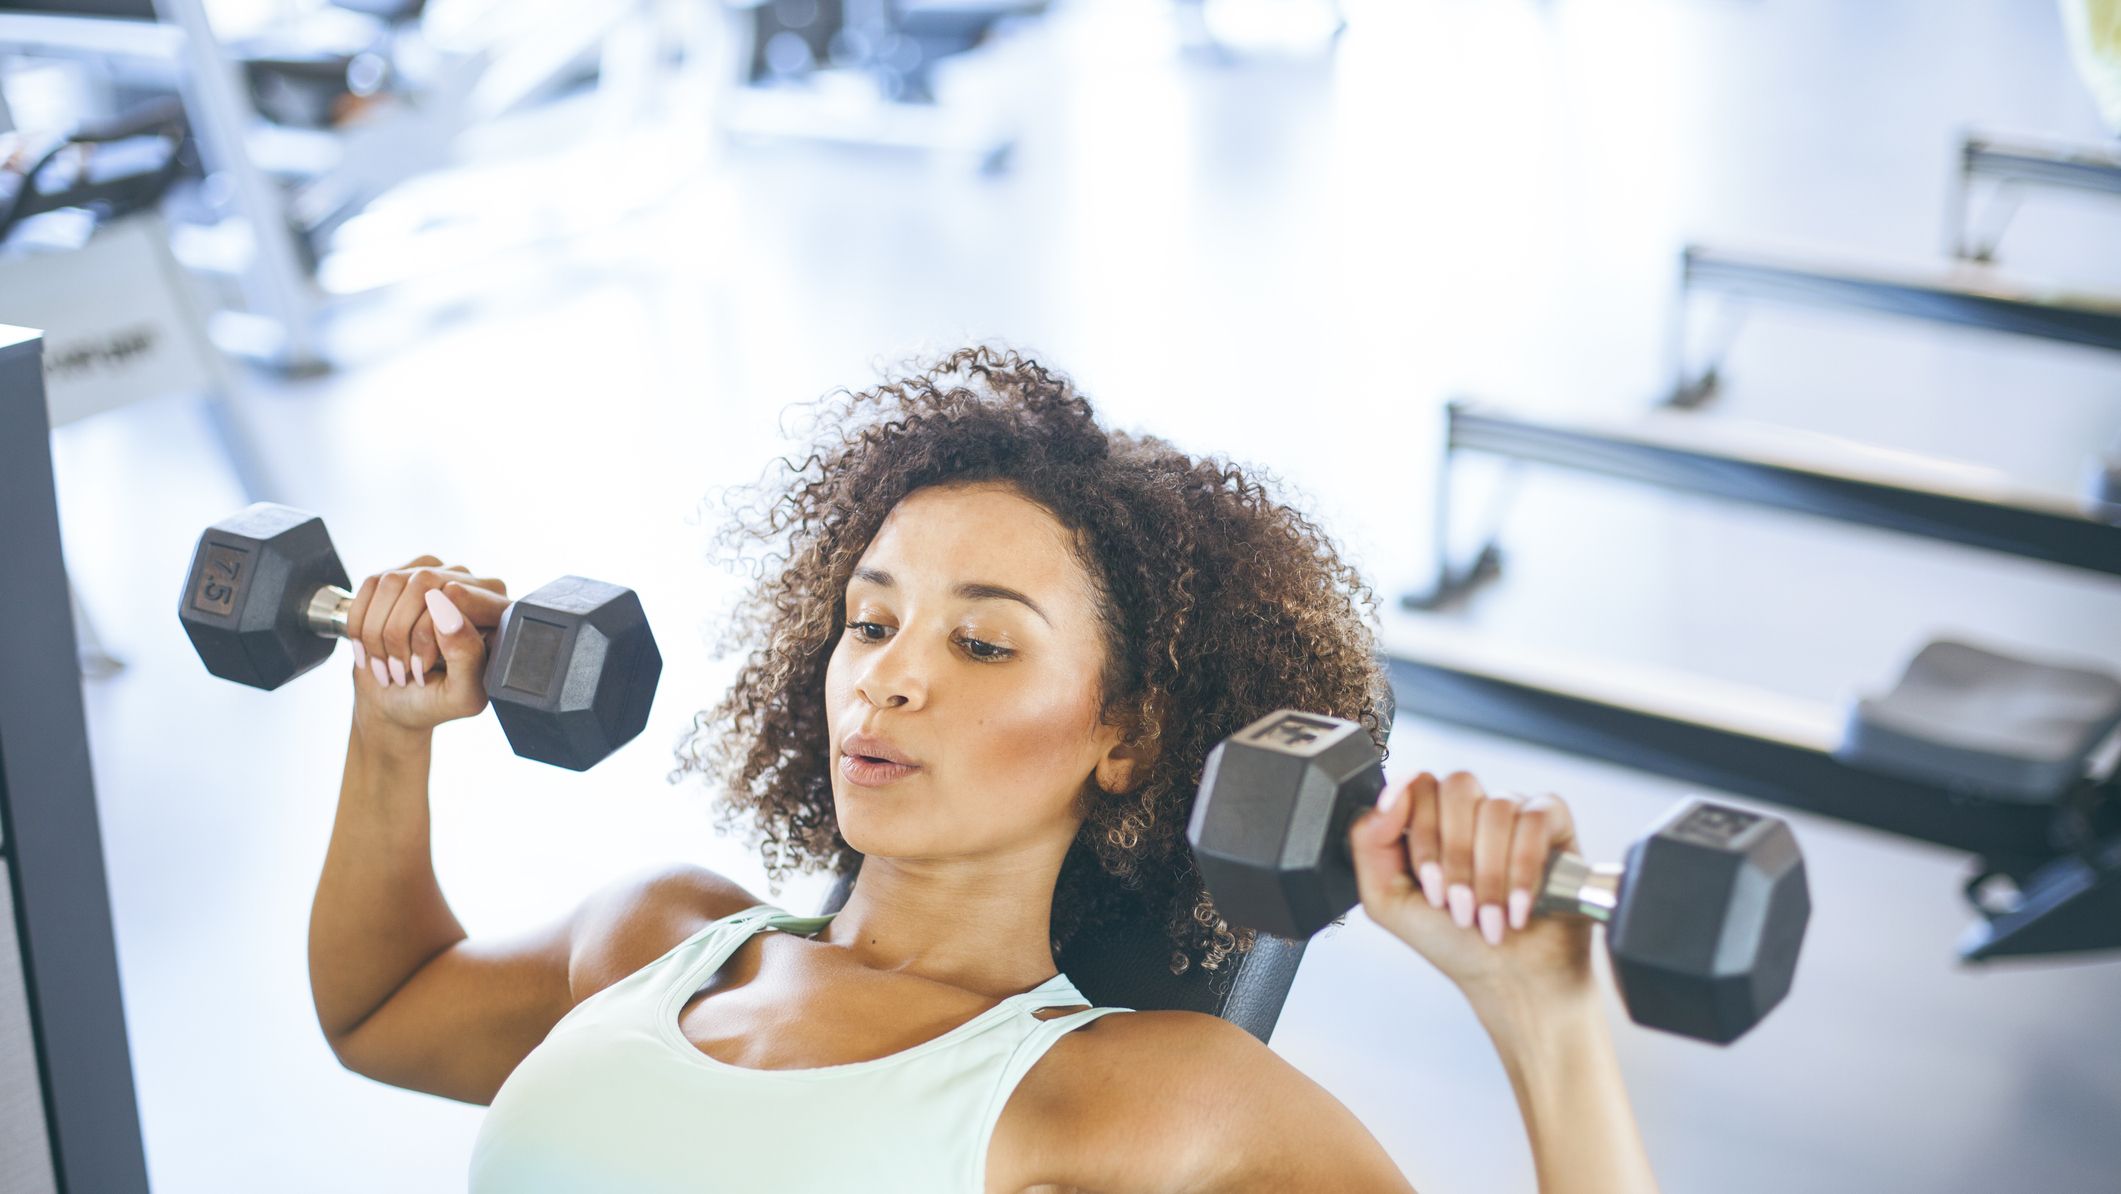 How To Effectively Build Muscle For Women, According To A Trainer